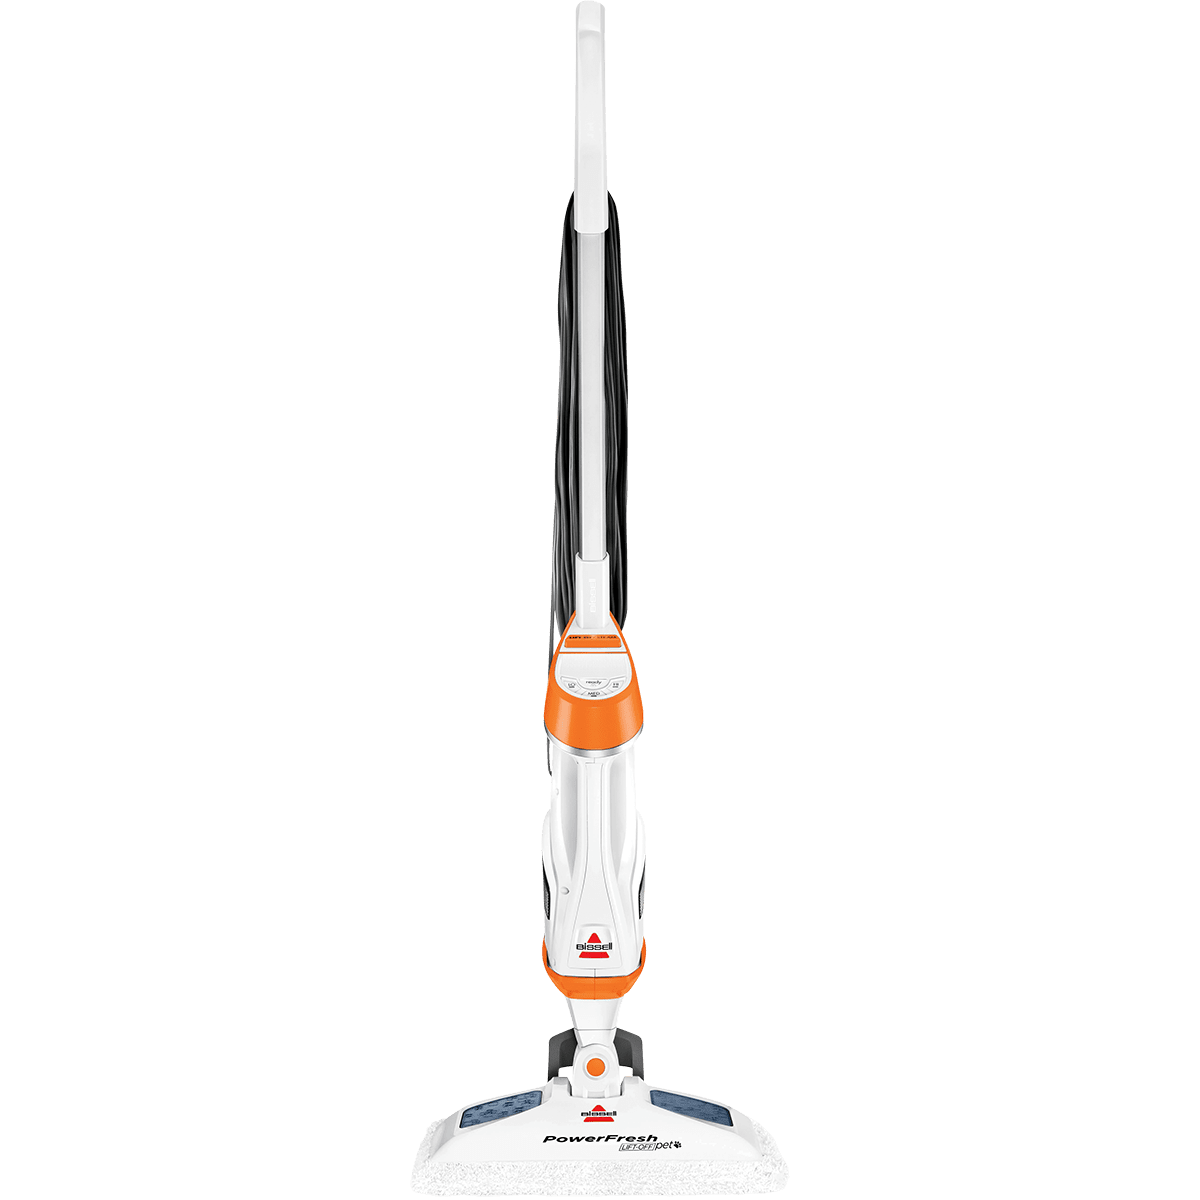 https://s3-assets.sylvane.com/media/images/products/bissell-powerfresh-pet-lift-off-steam-mop-main.png